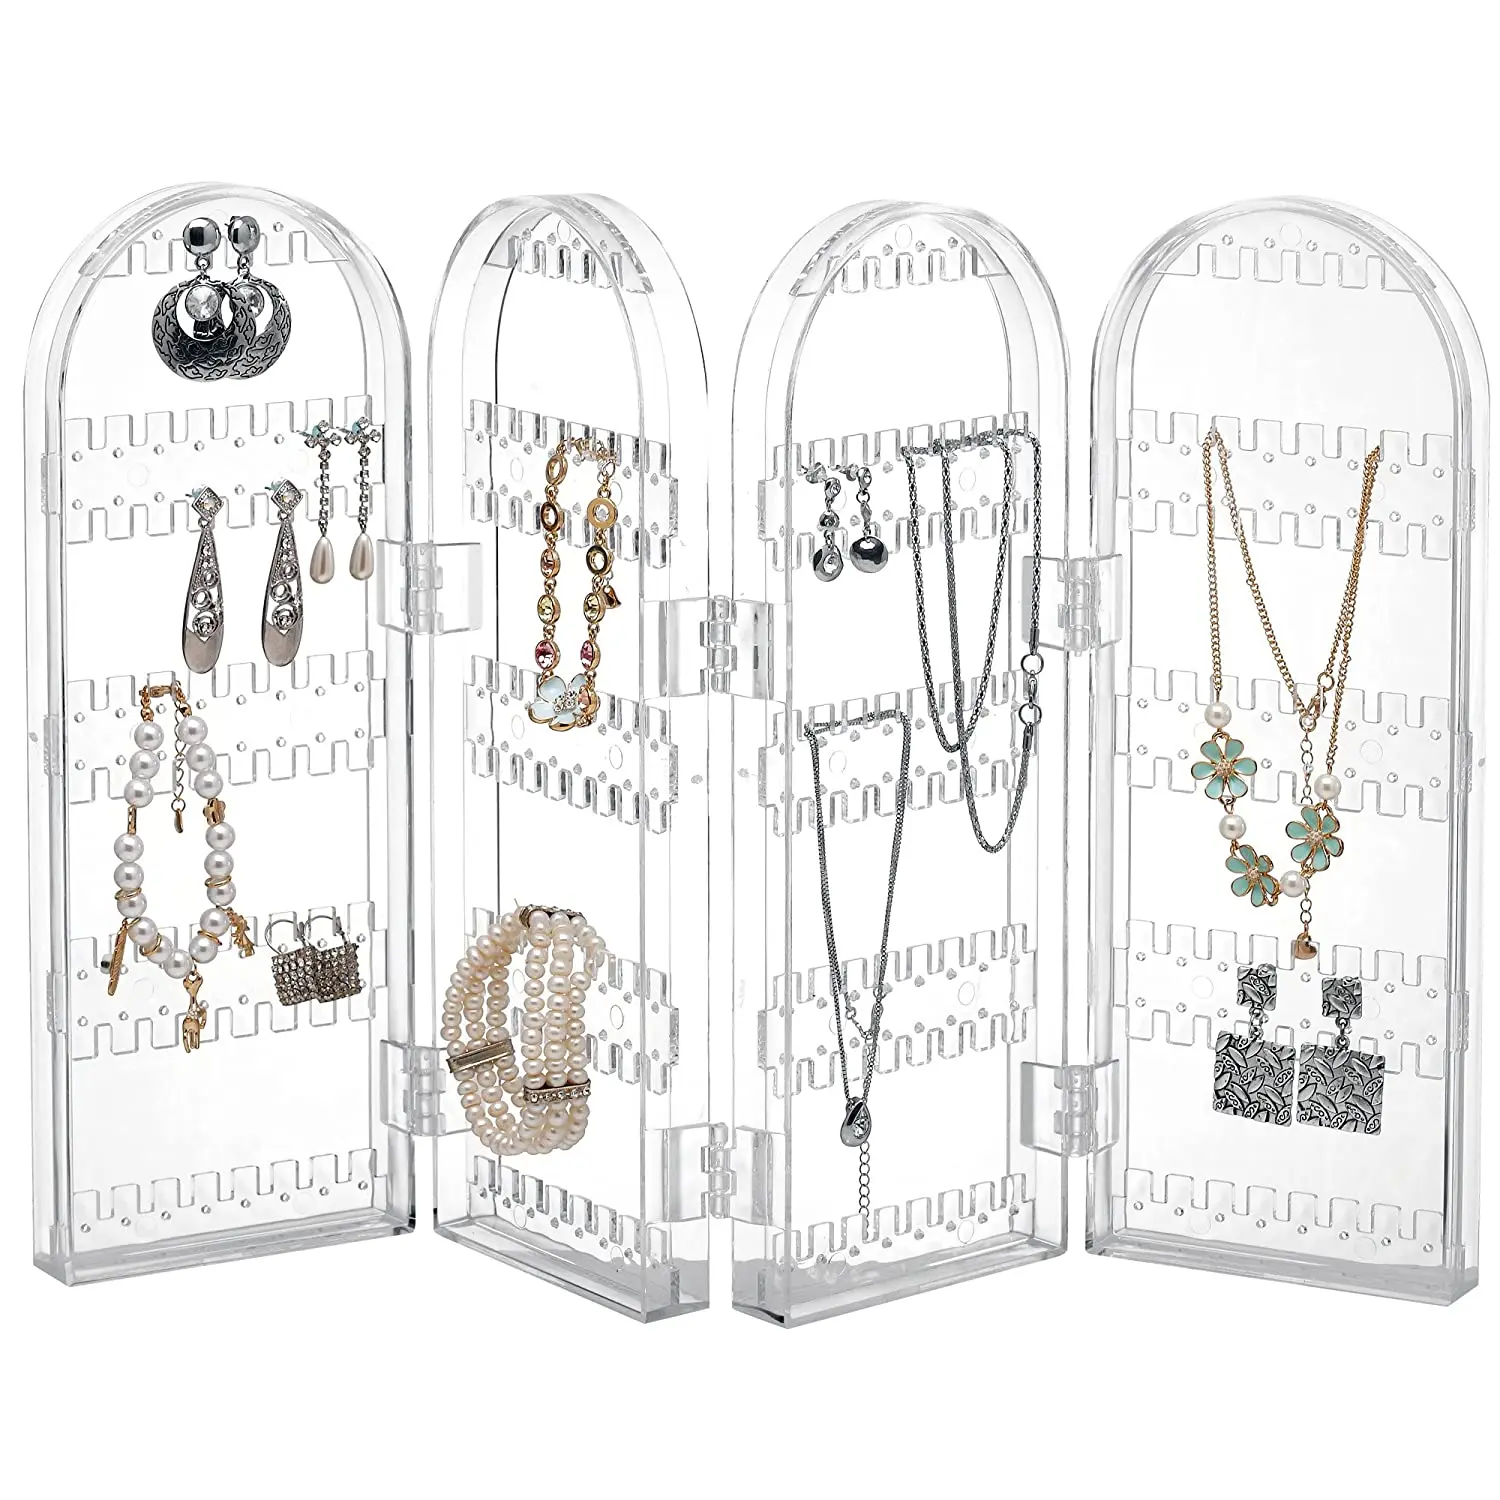 Outgeek Jewelry Display Rack Picture Frame Design Earring Hanger Necklace Display Stand 